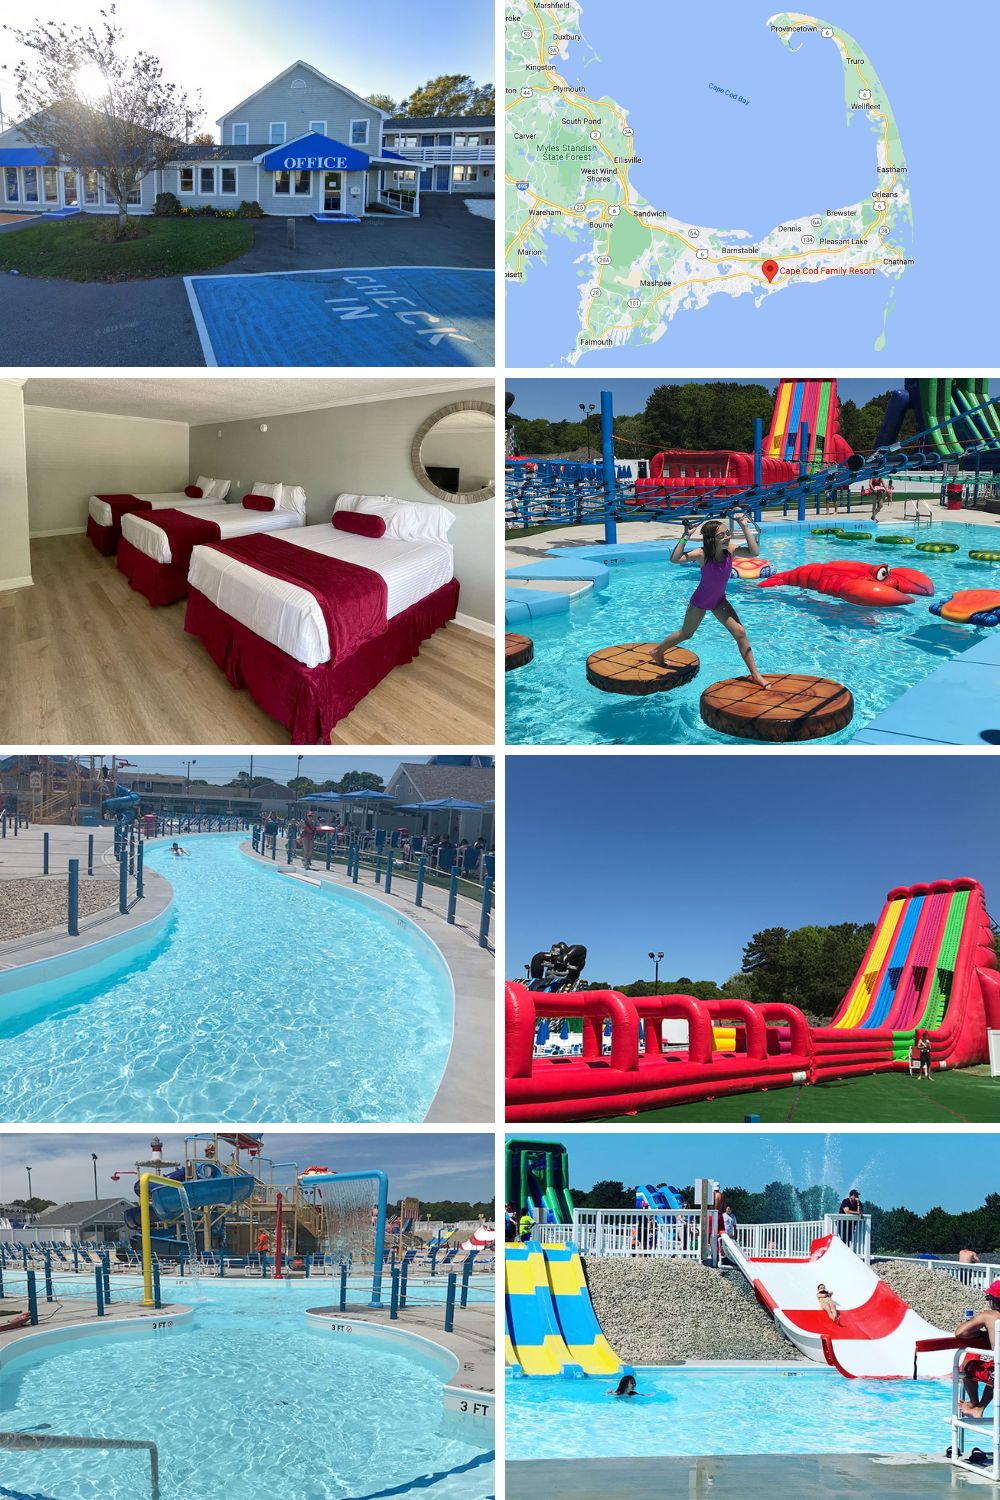 Cape Cod Inflatable Park and Family Resort